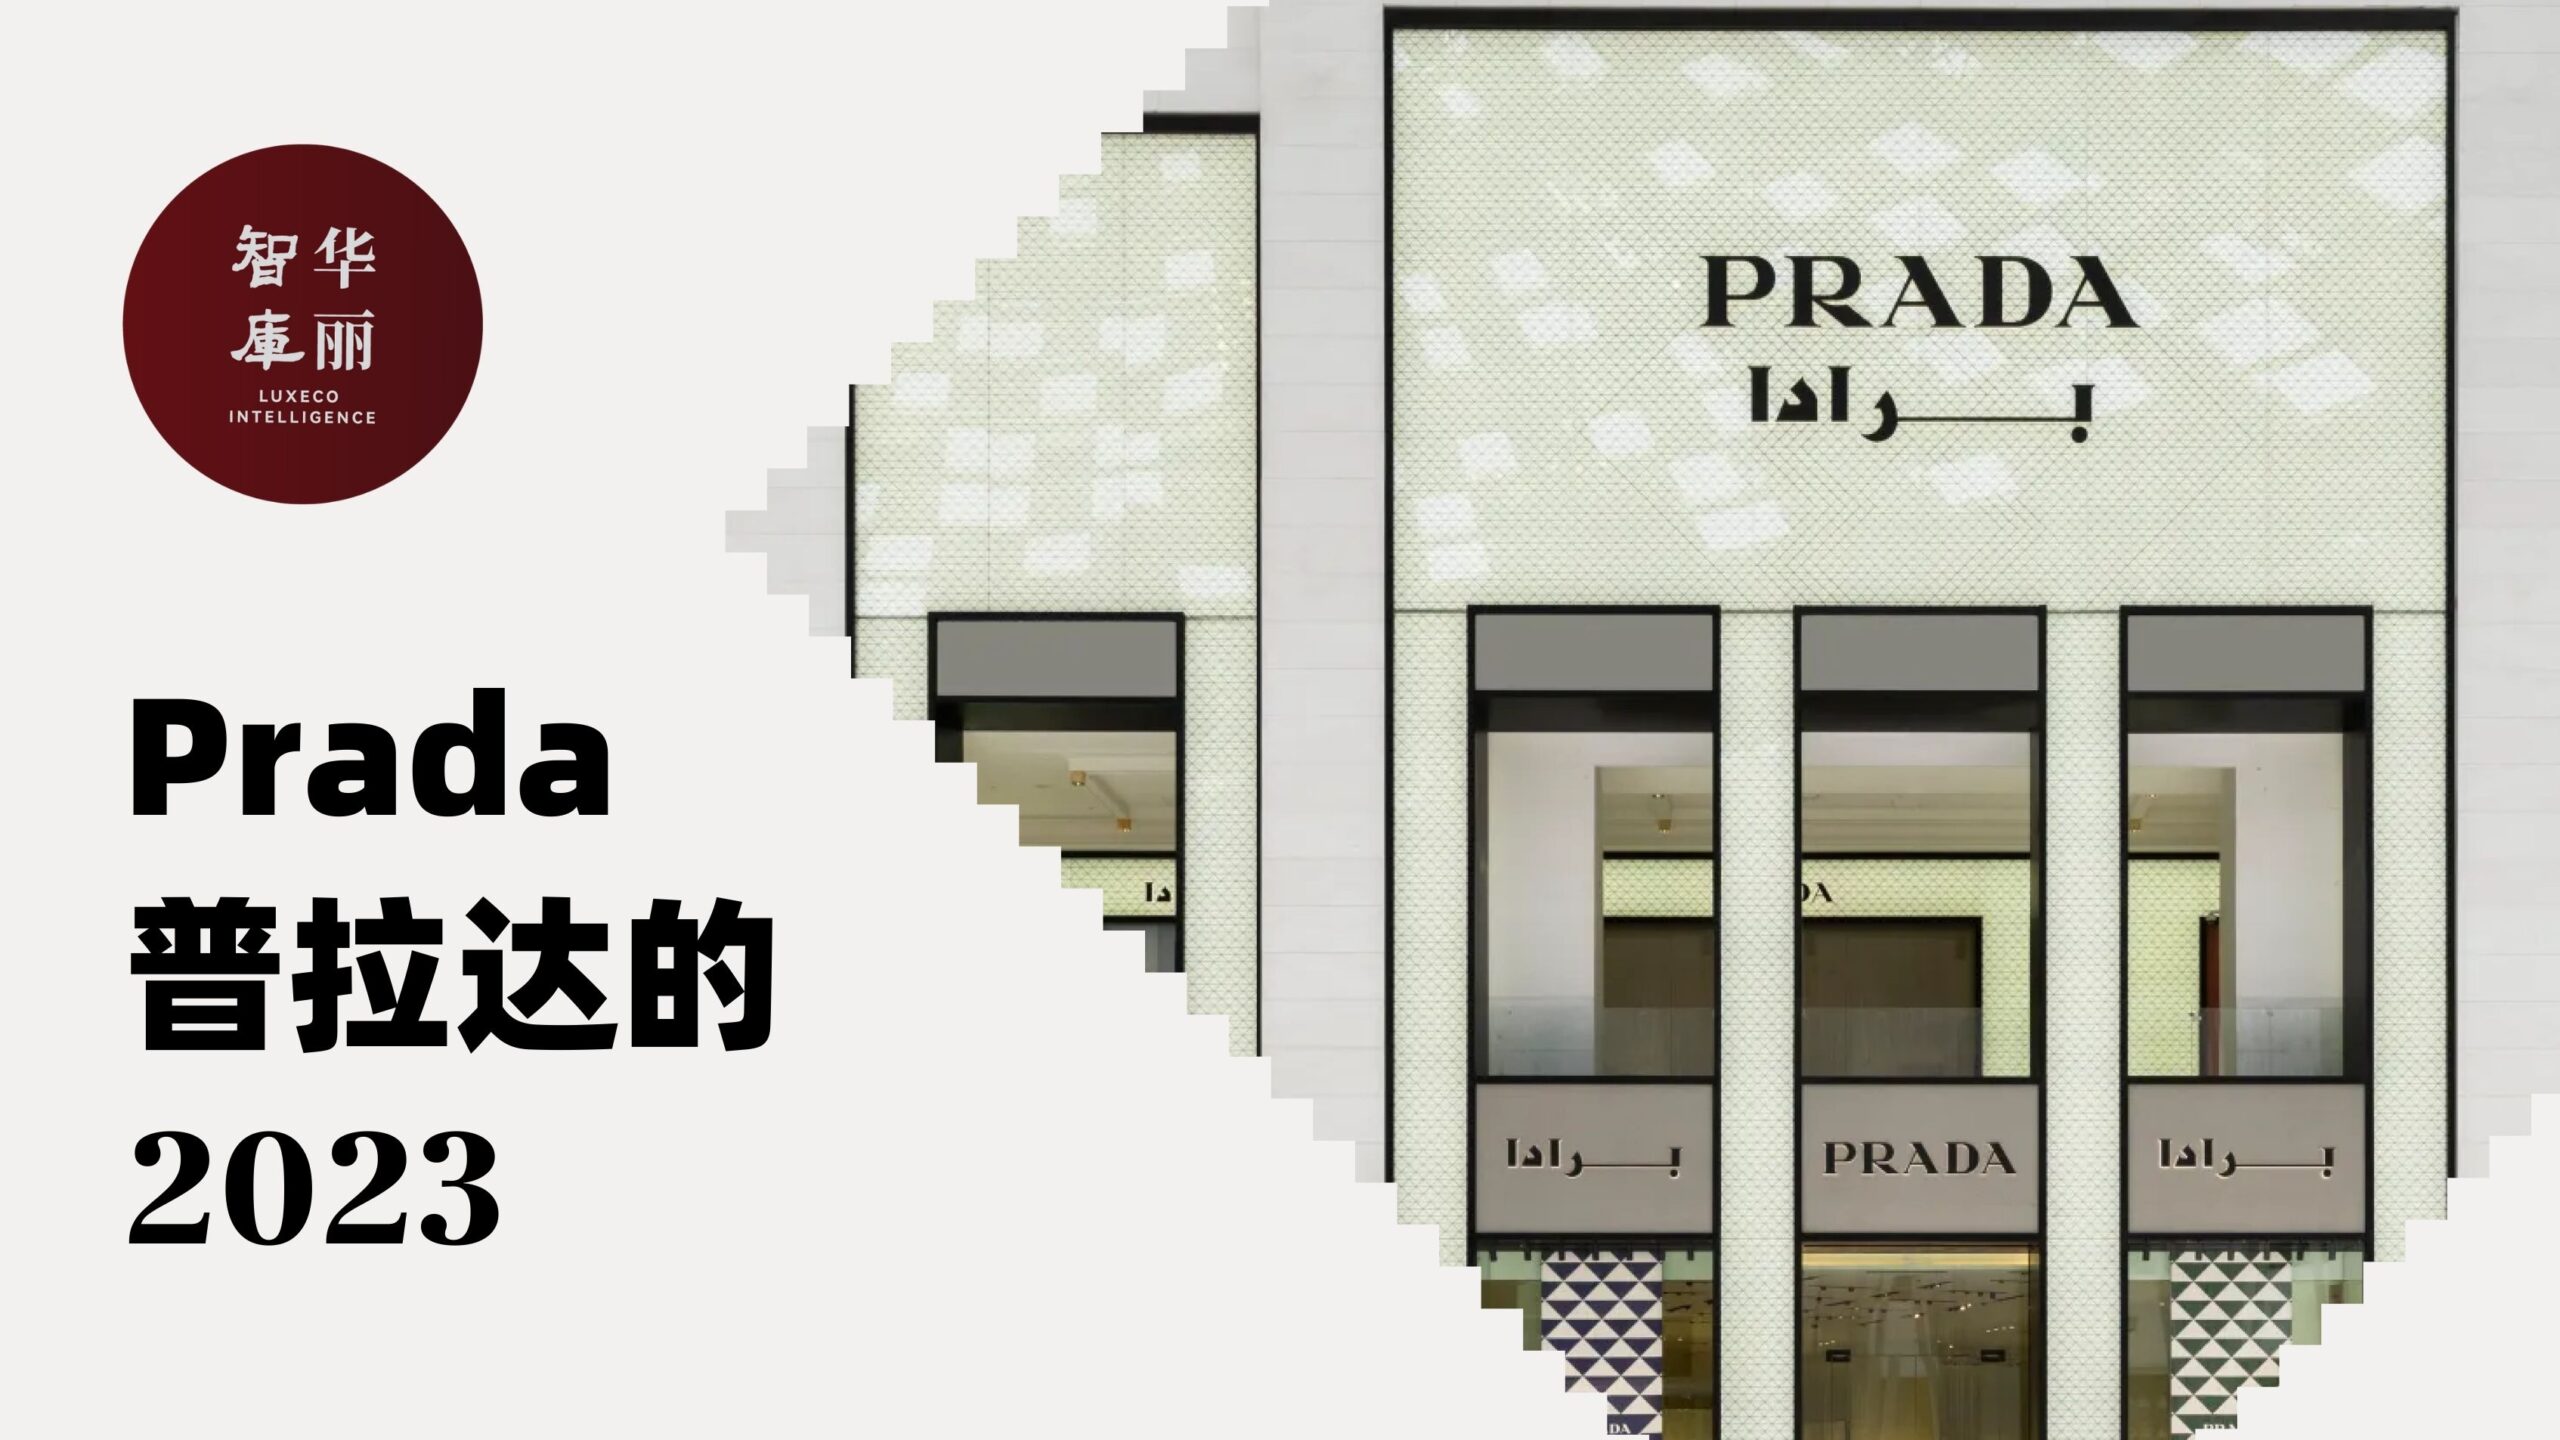 Luxe.CO Intelligence Presents Report “Prada in 2023”